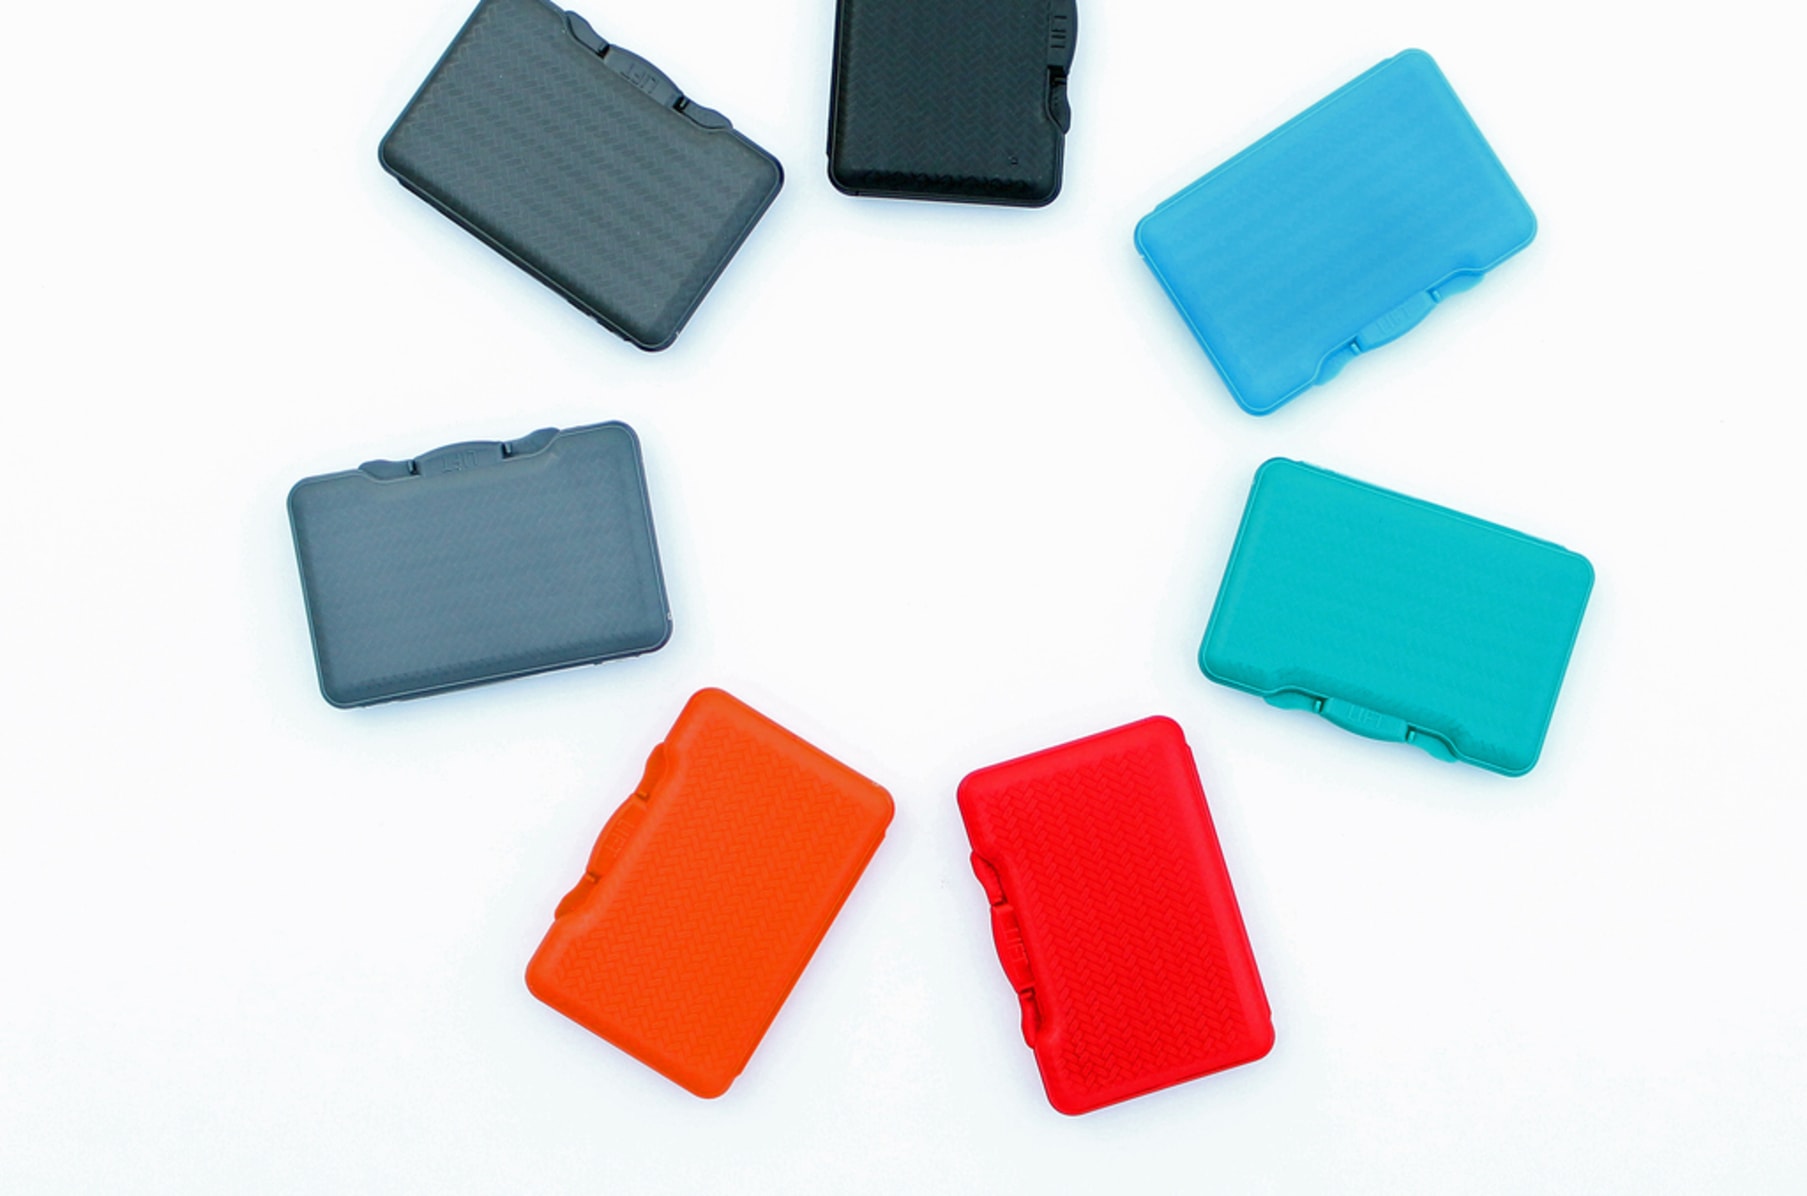 These sleek, low-profile pill boxes organize your medication in style